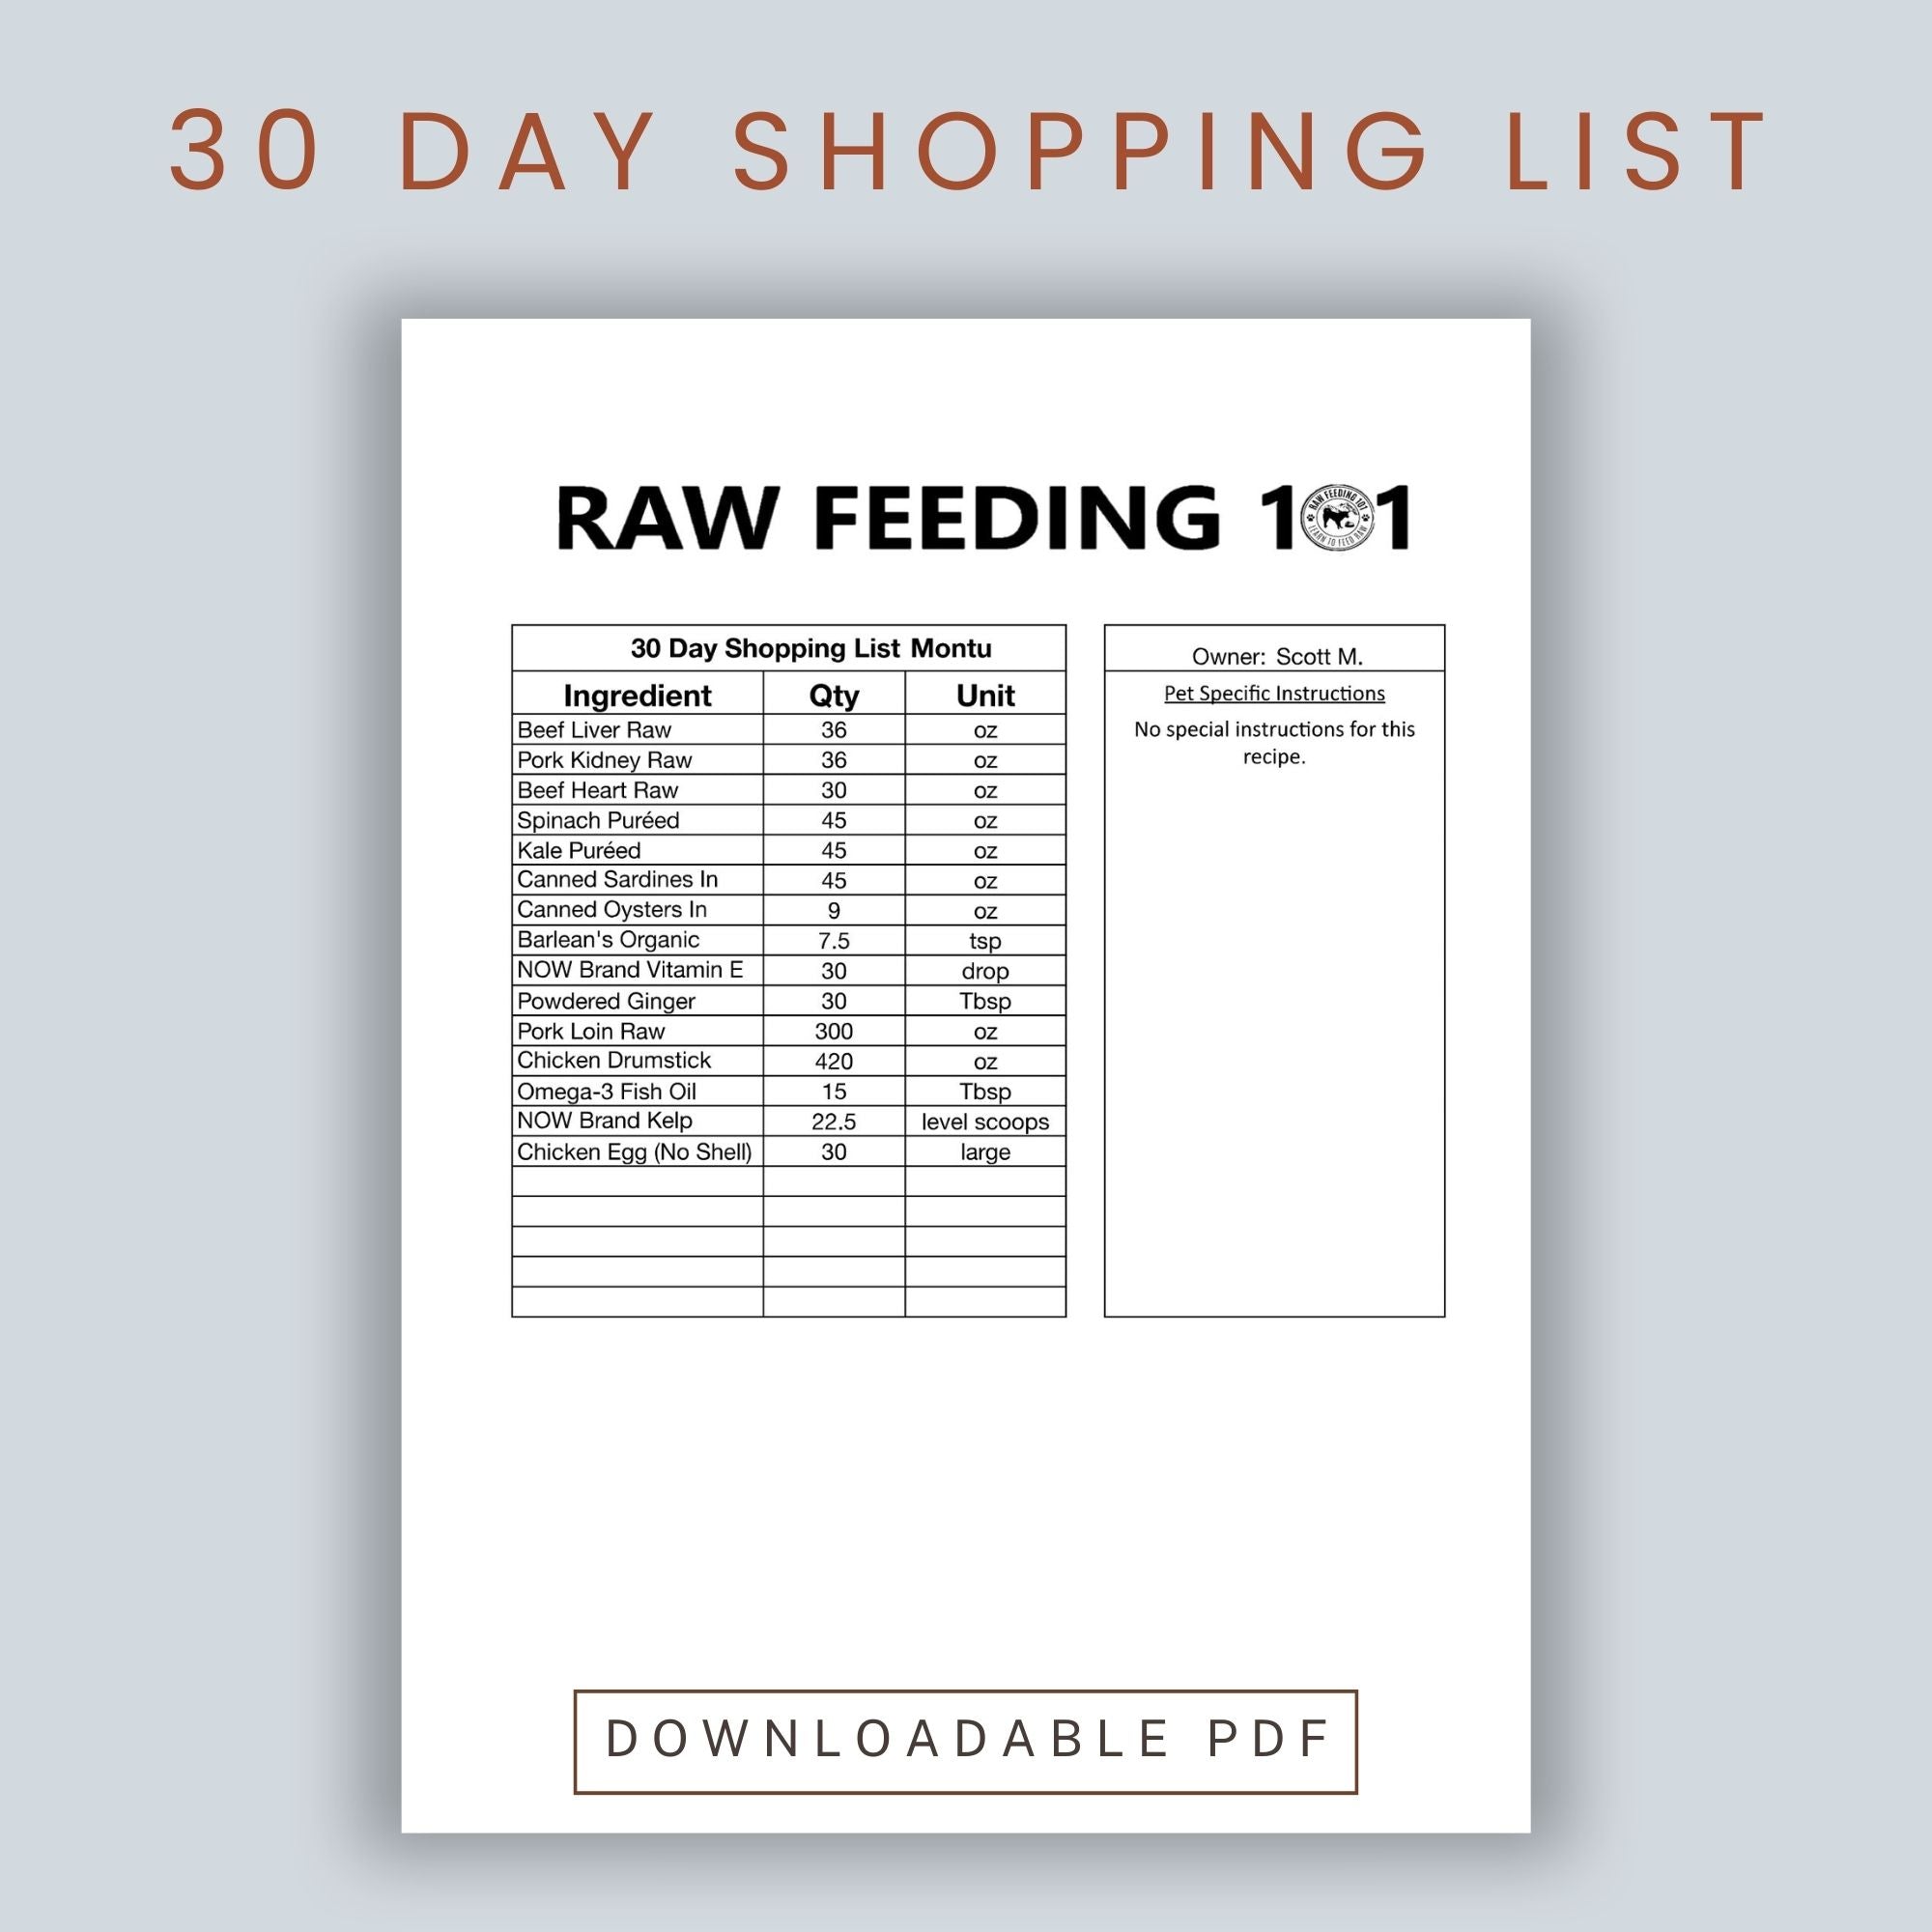 NRC Raw Feeding Meal Plans For Dogs